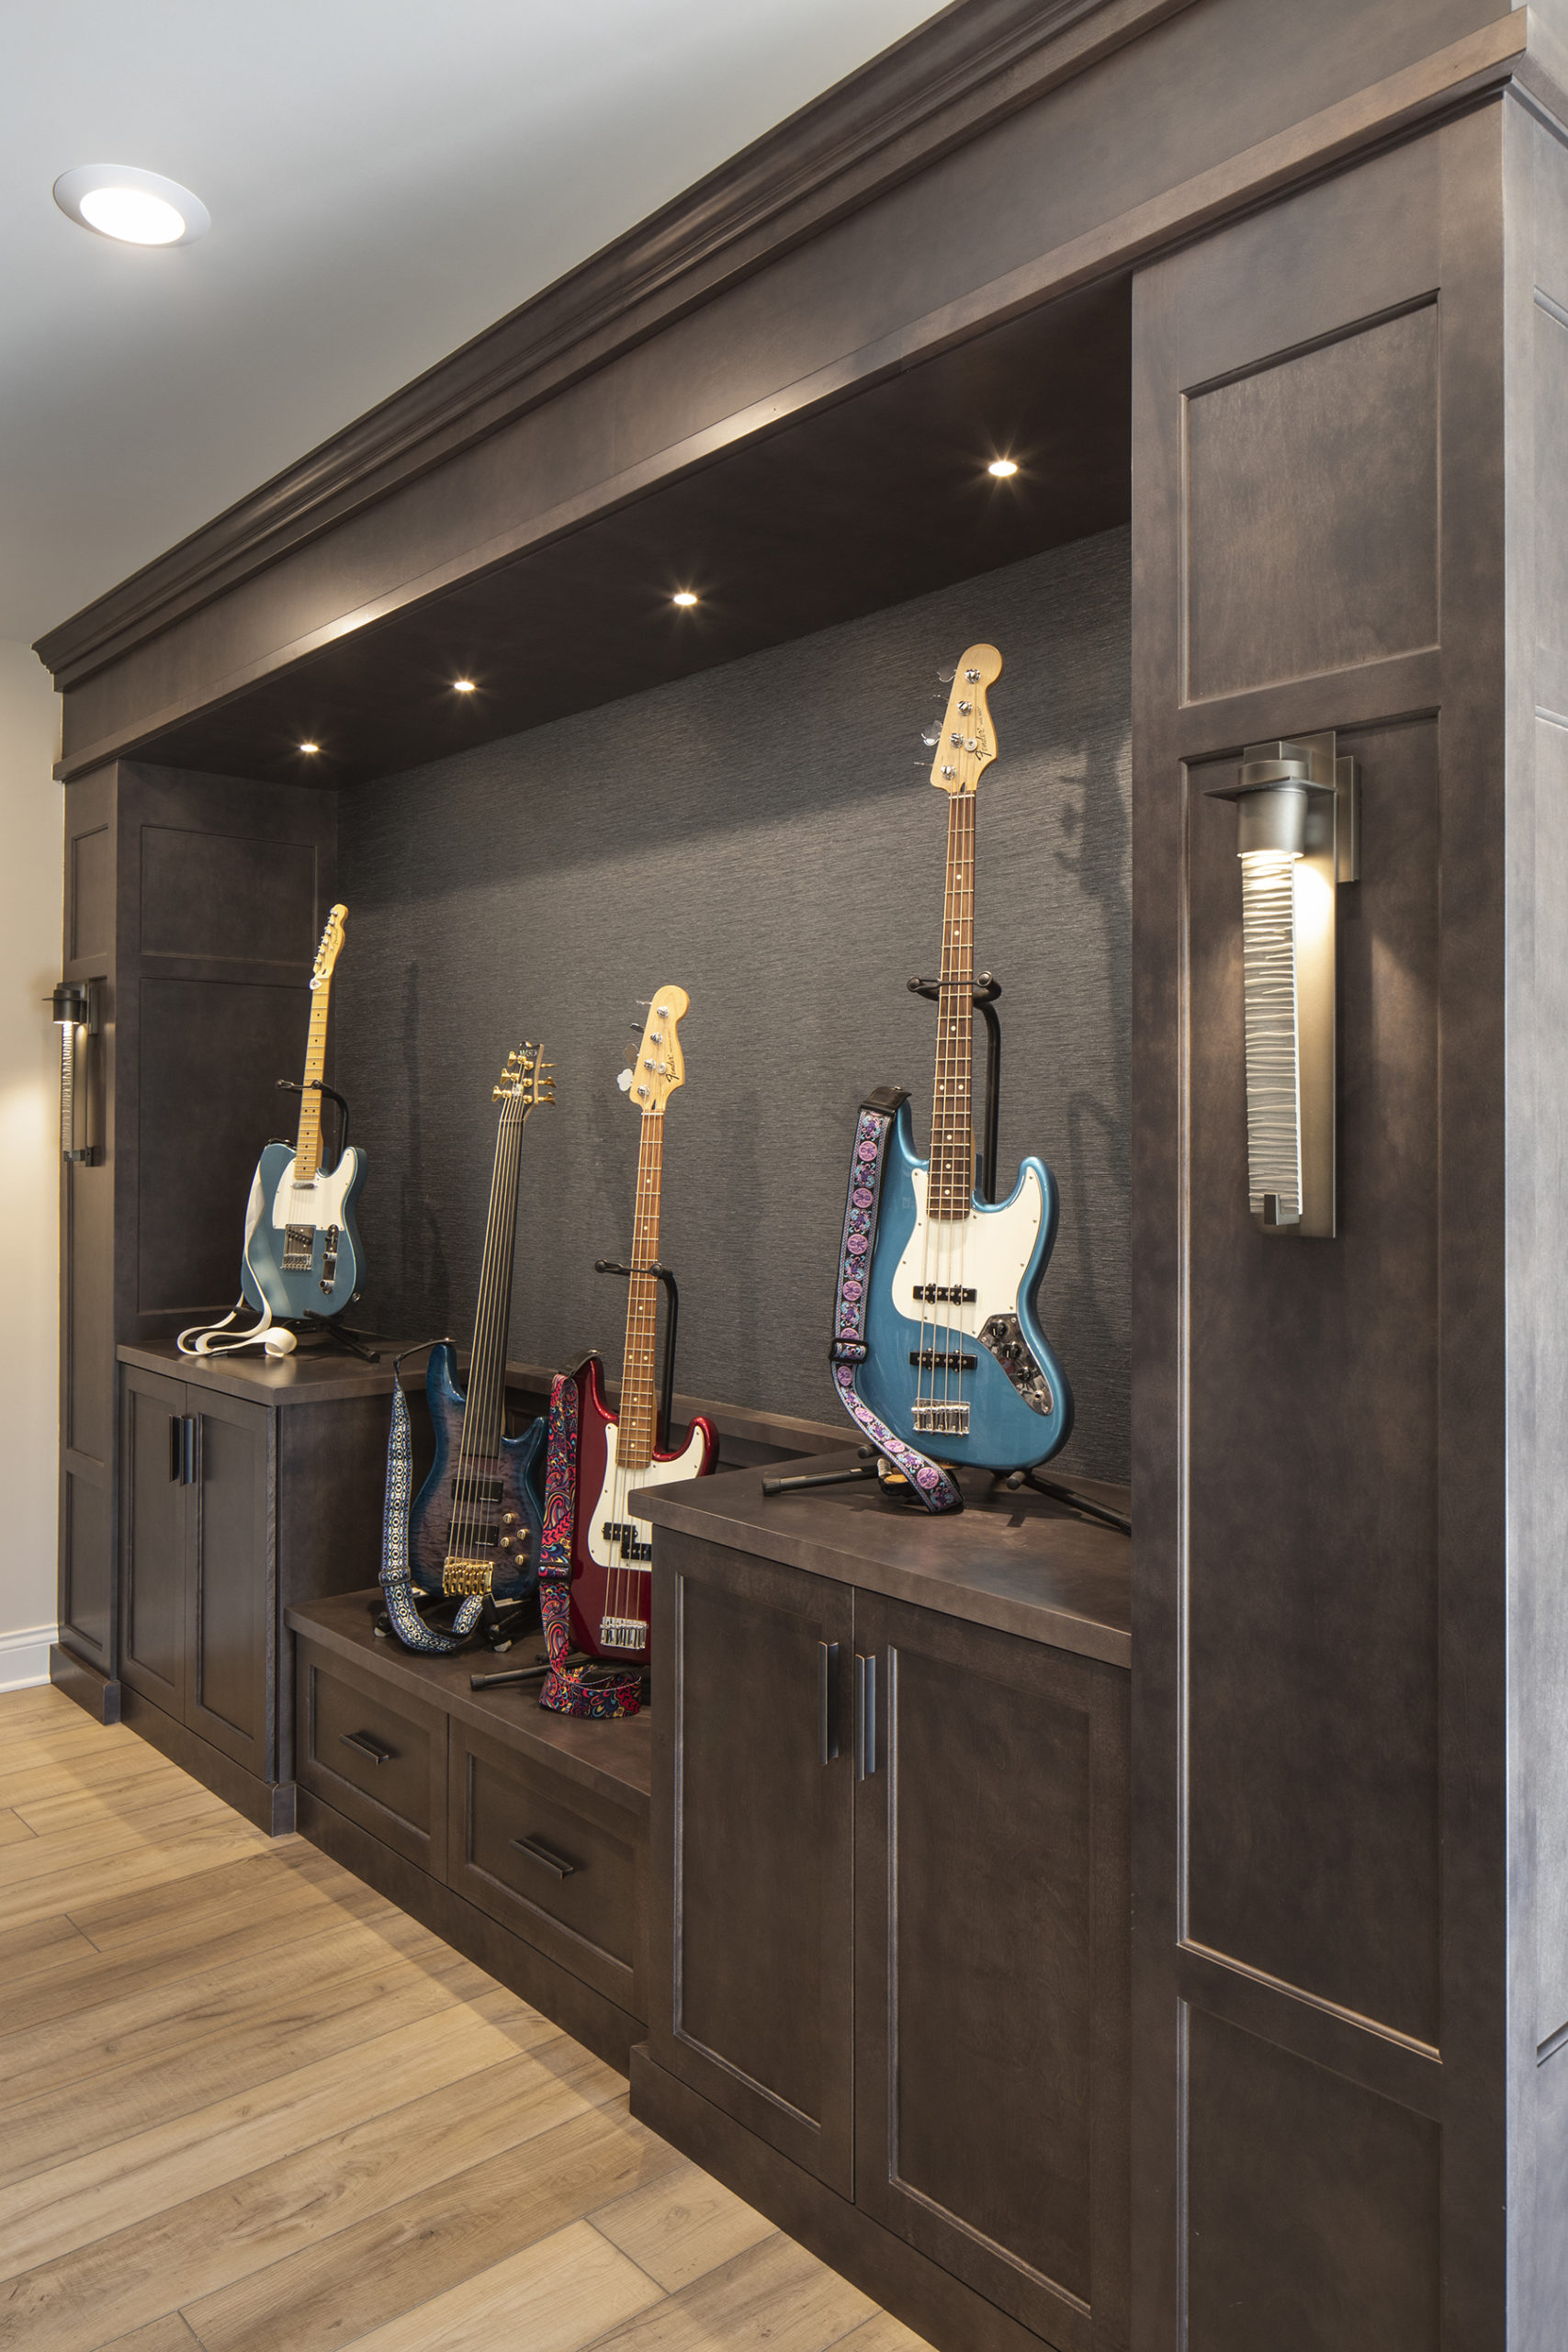         Description: A custom home build featuring a stylish room with several guitars on display.